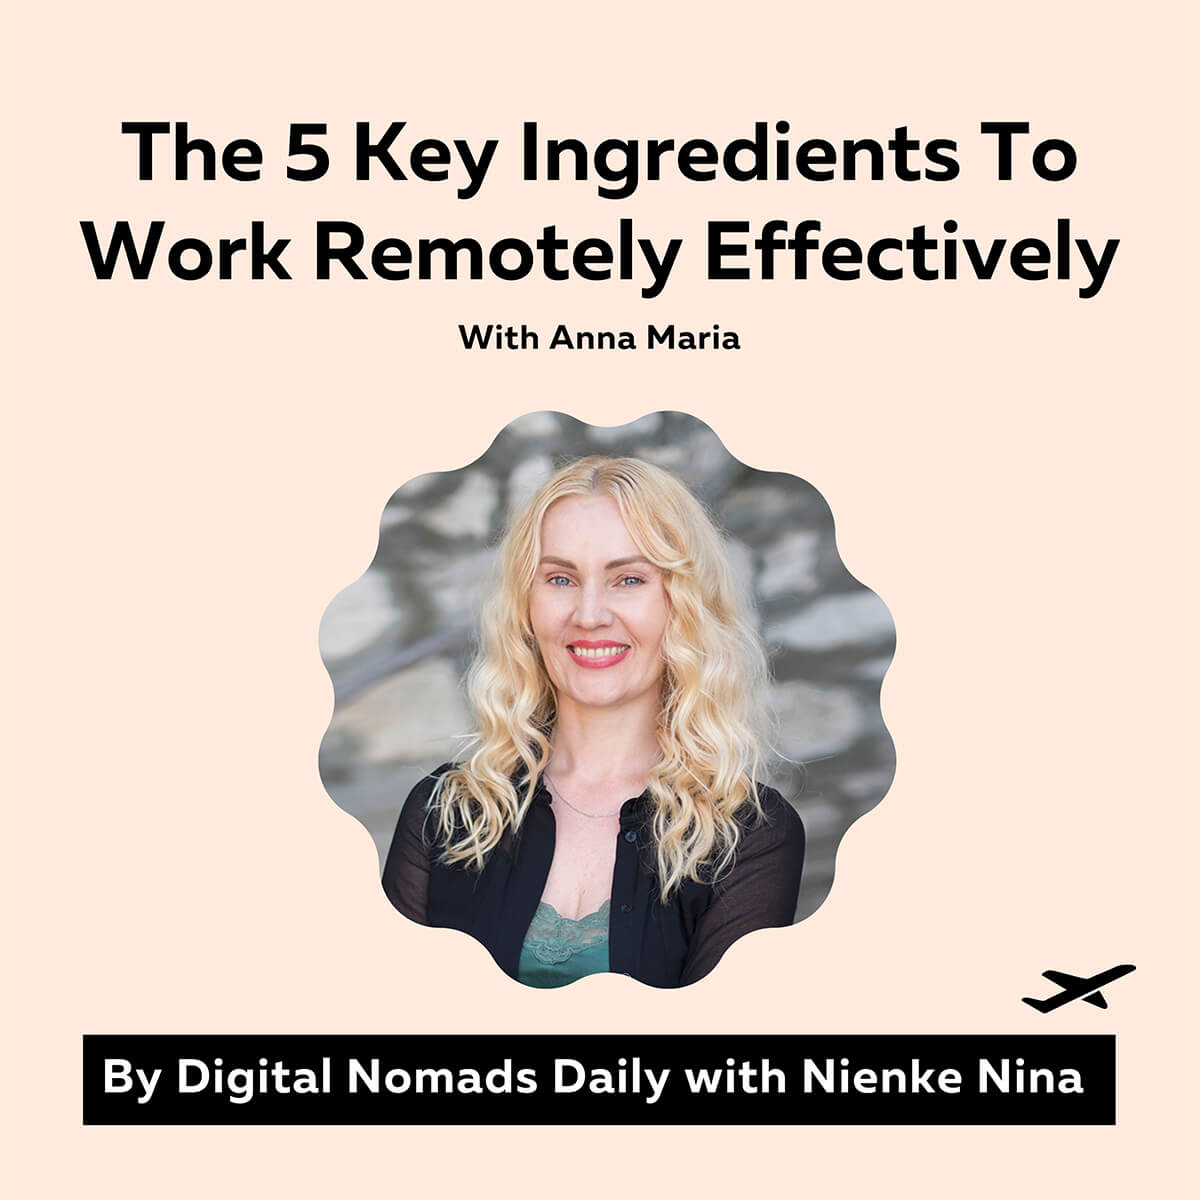 Cover of Digital Nomads Daily Podcast episode 41 The 5 Key Ingredients To Work Remotely Effectively with Anna Maria (1)